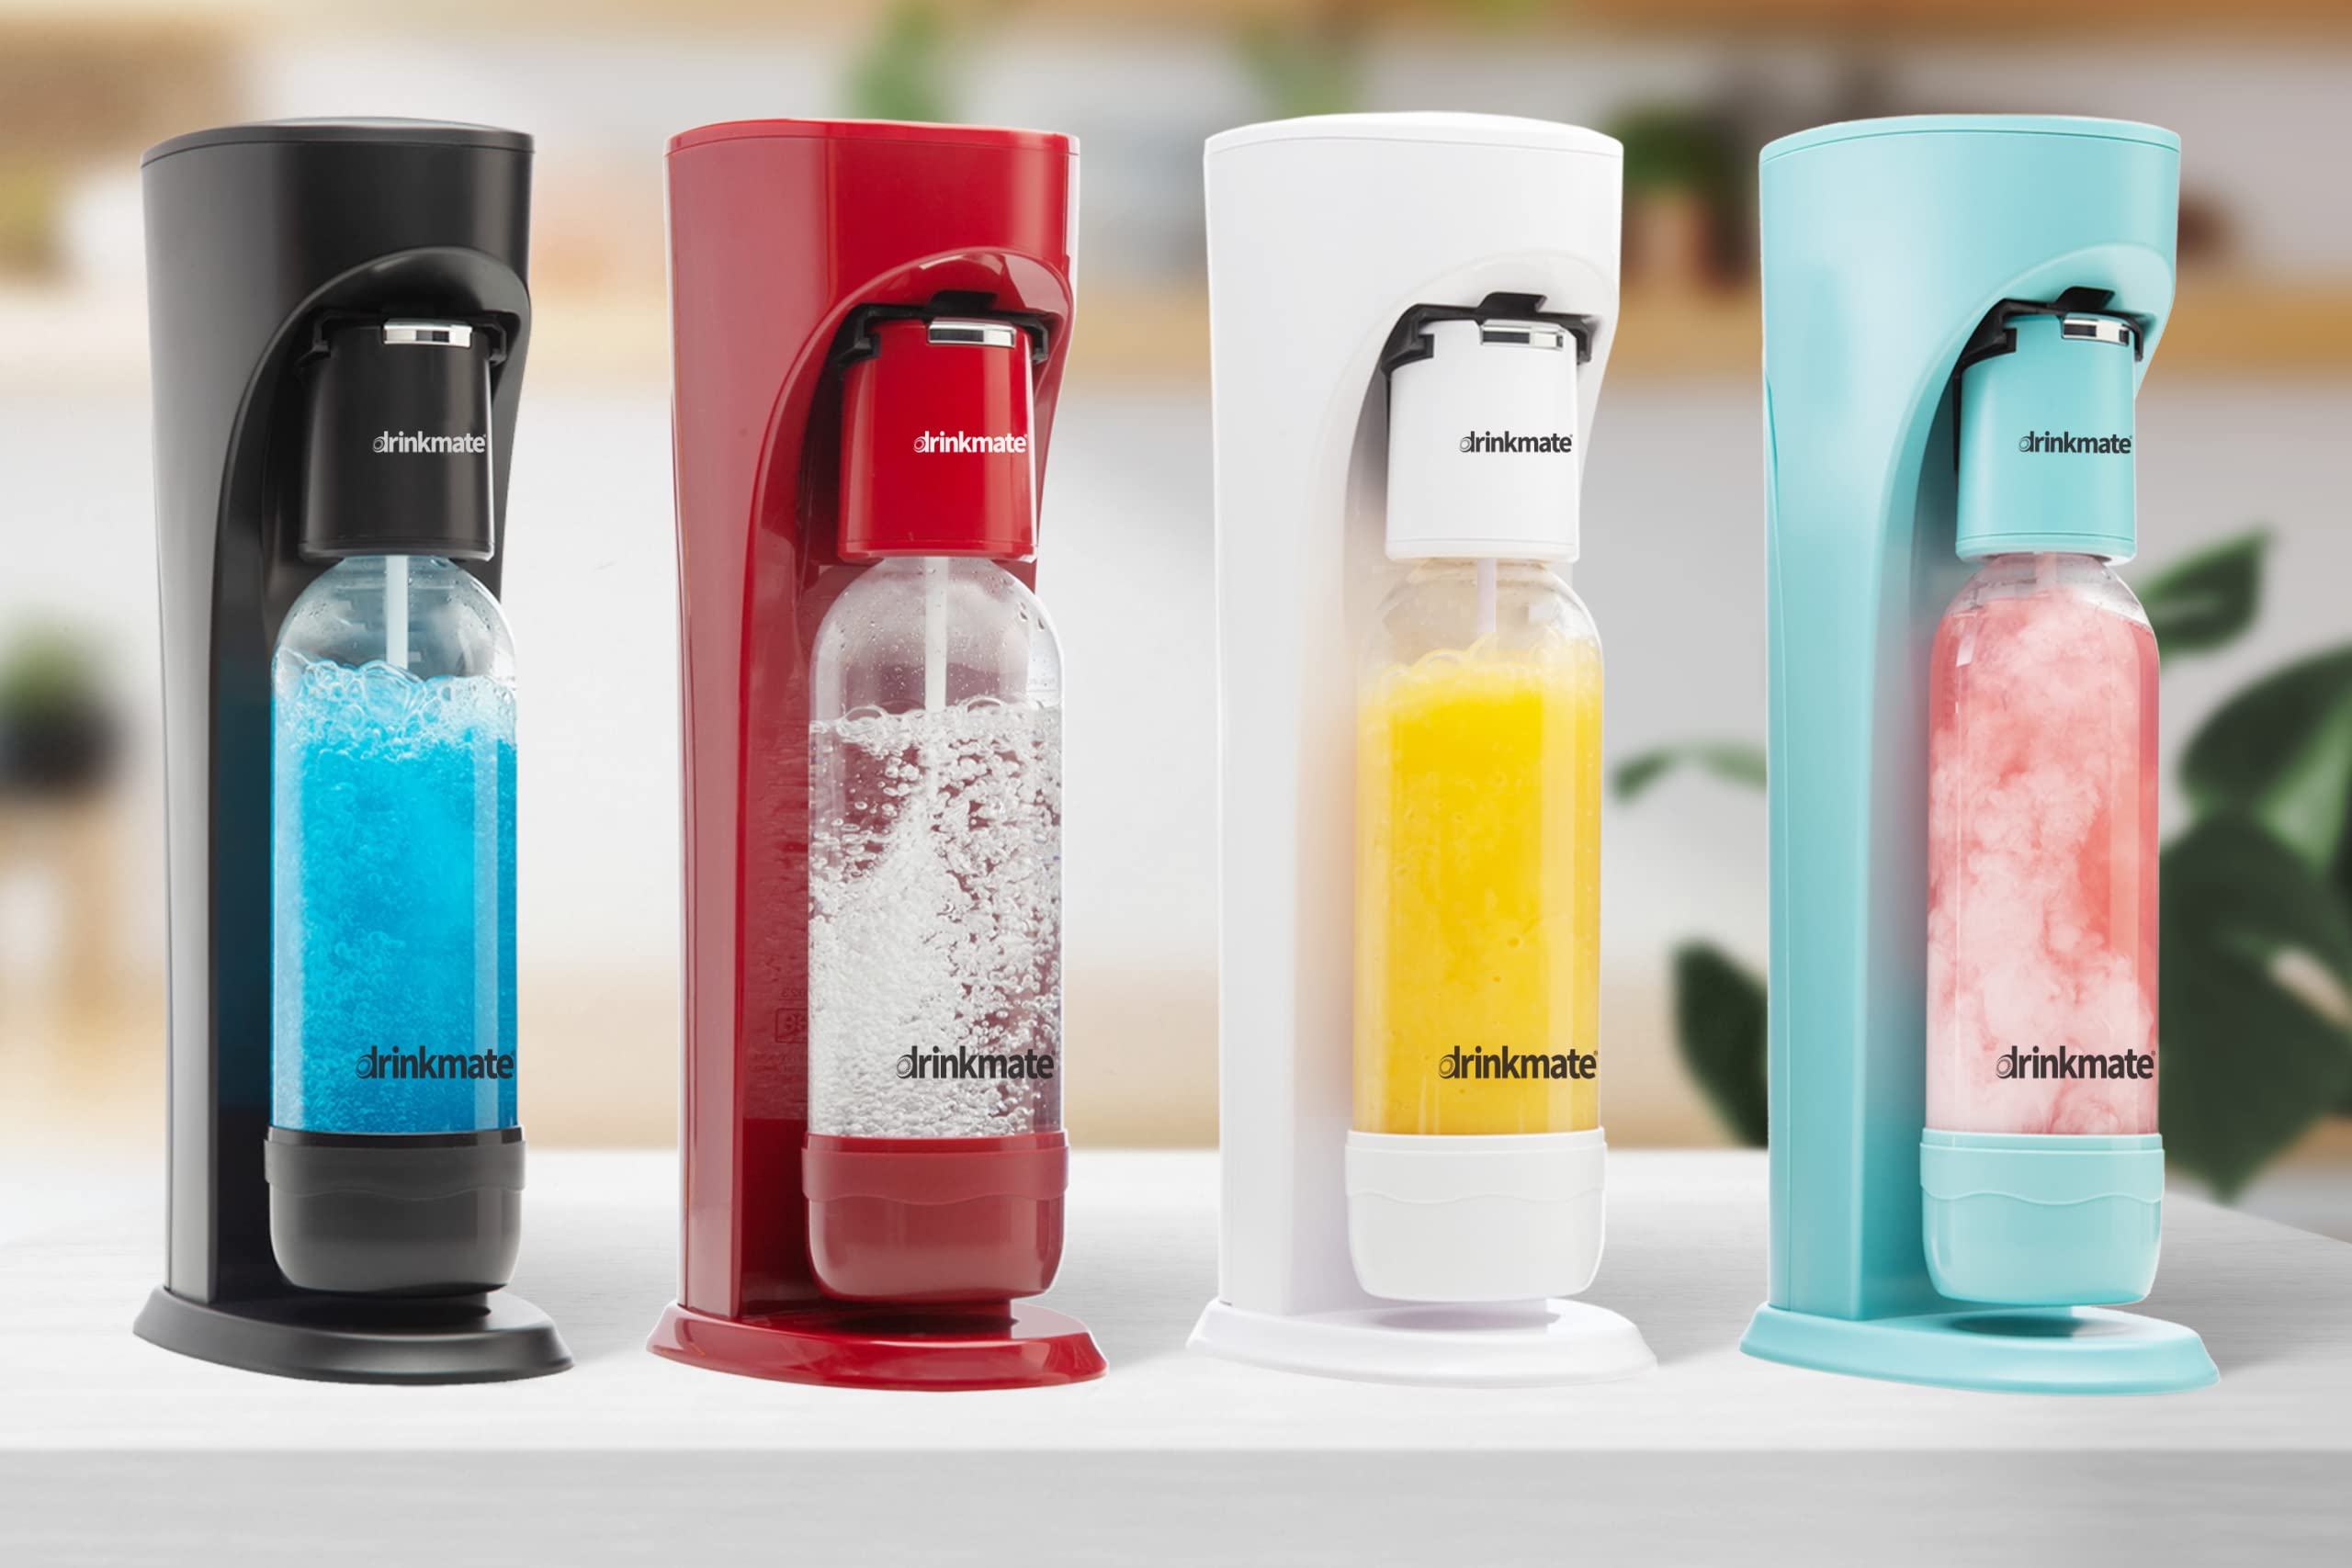 Drinkmate OmniFizz Sparkling Water and Soda Maker, Carbonates Any Drink, ULTIMATE BUNDLE With CO2 and BPA Free Bottles (Arctic Blue)